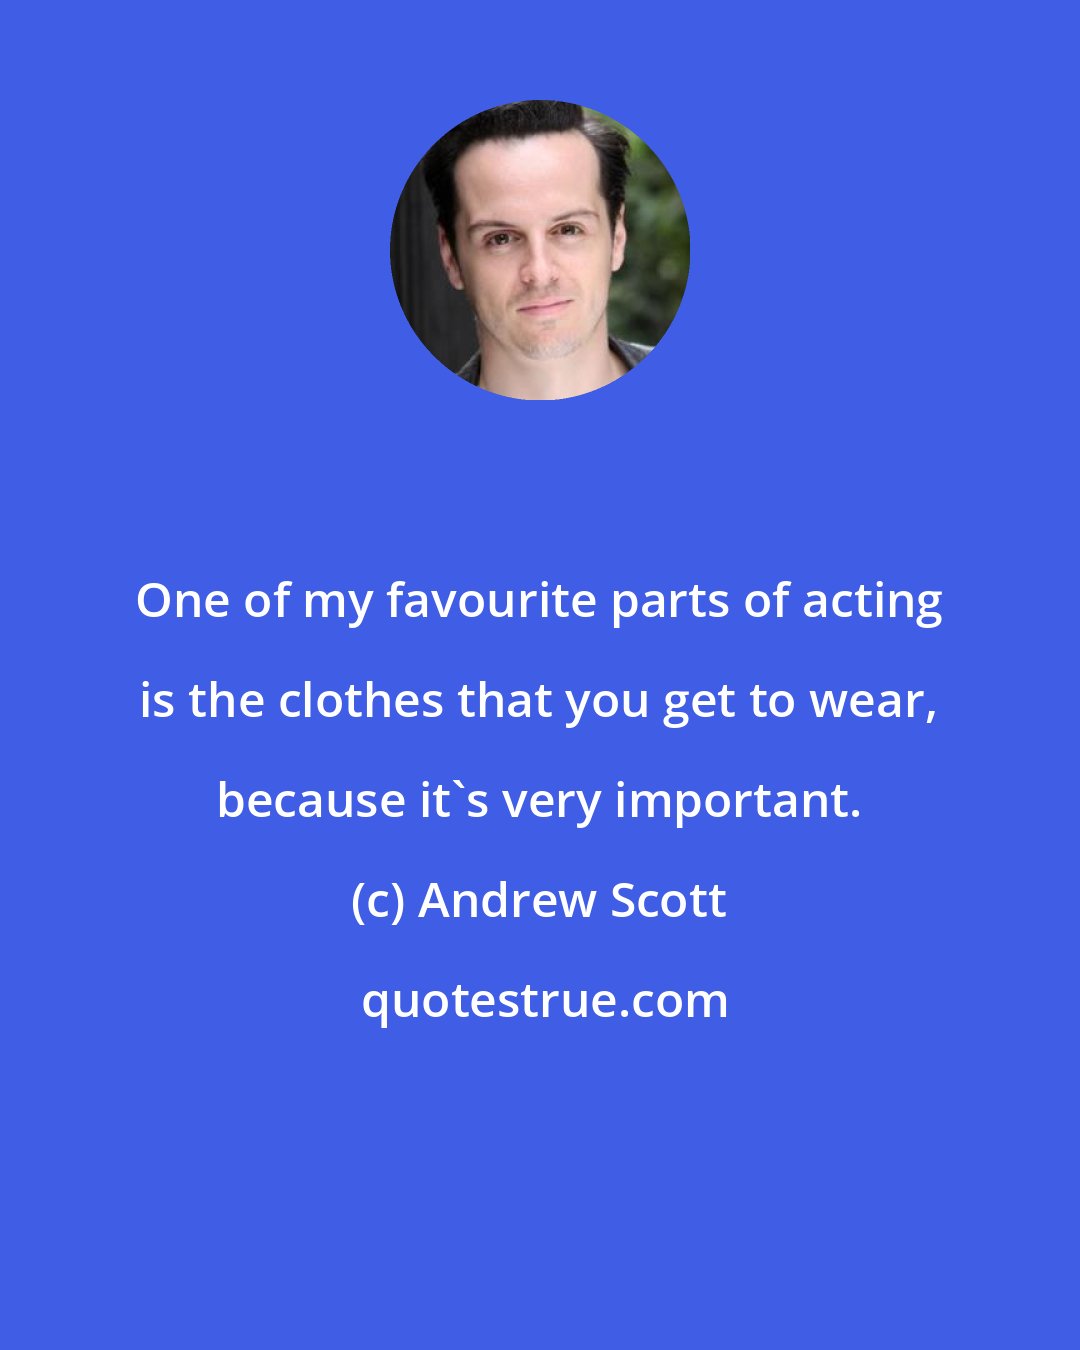 Andrew Scott: One of my favourite parts of acting is the clothes that you get to wear, because it's very important.